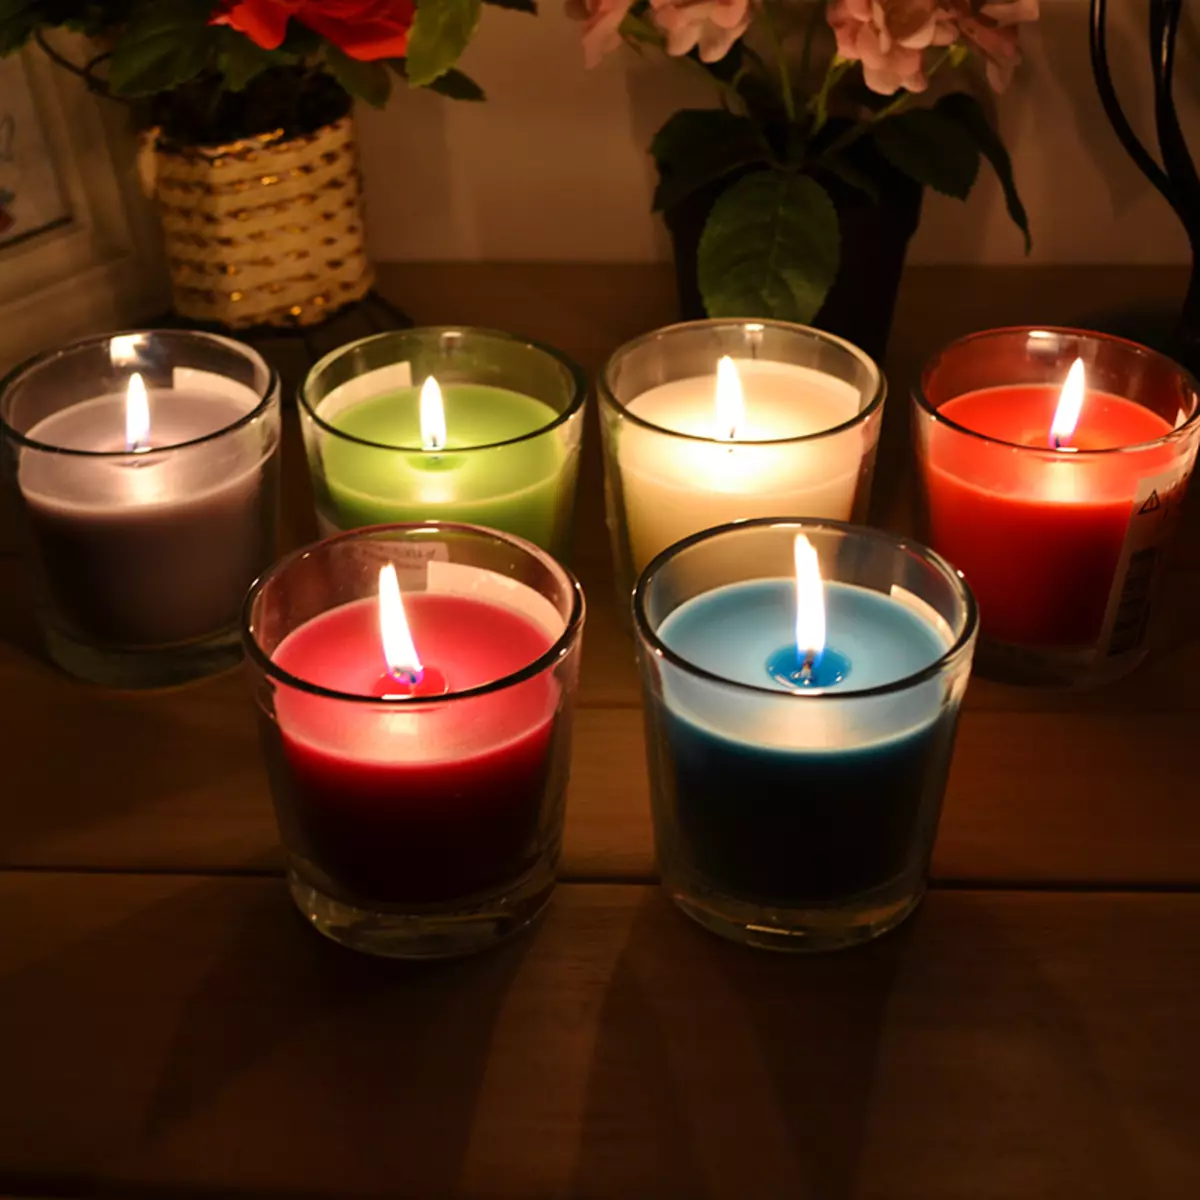 IKEA candles: aromatic in a glass and led candles on batteries, tea candle sets, red flavored candles and other options 8897_16